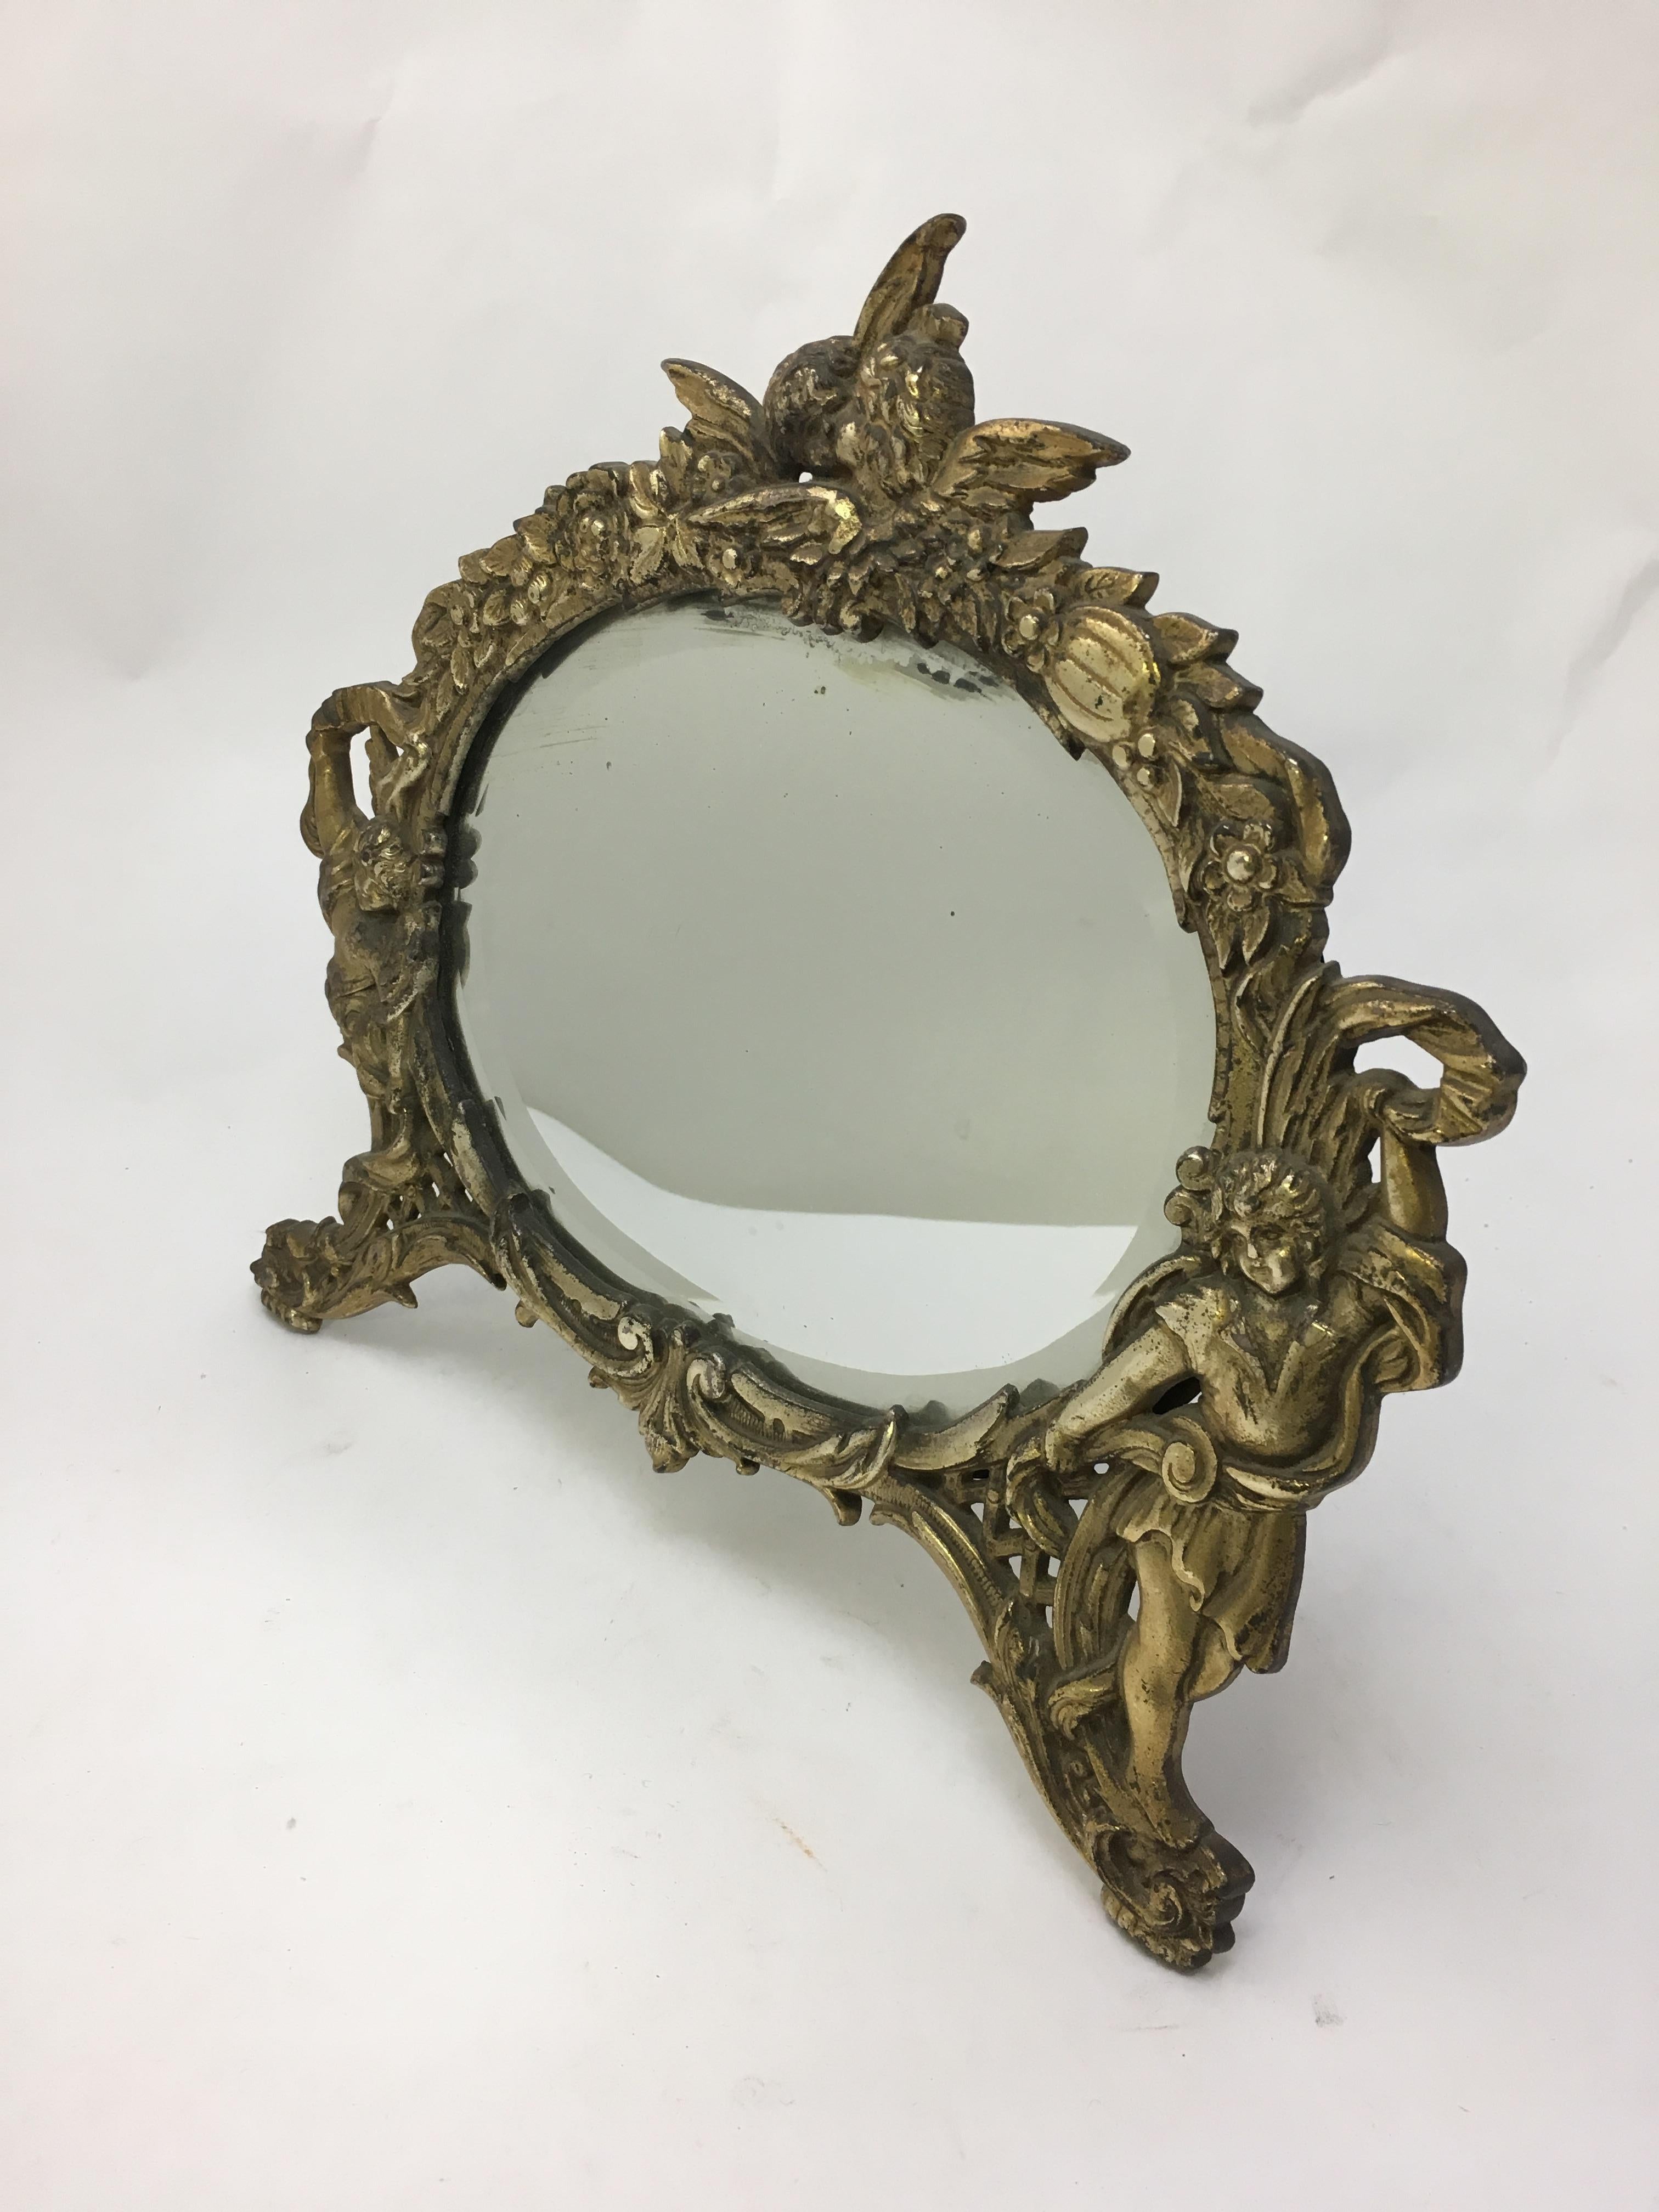 Gilded cast iron standing mirror decorated with floral scroll and putti motif. Oval bevel glass mirror. Fully signed on reverse, NB&IW, 2000, circa 1910. 

Measures: 6